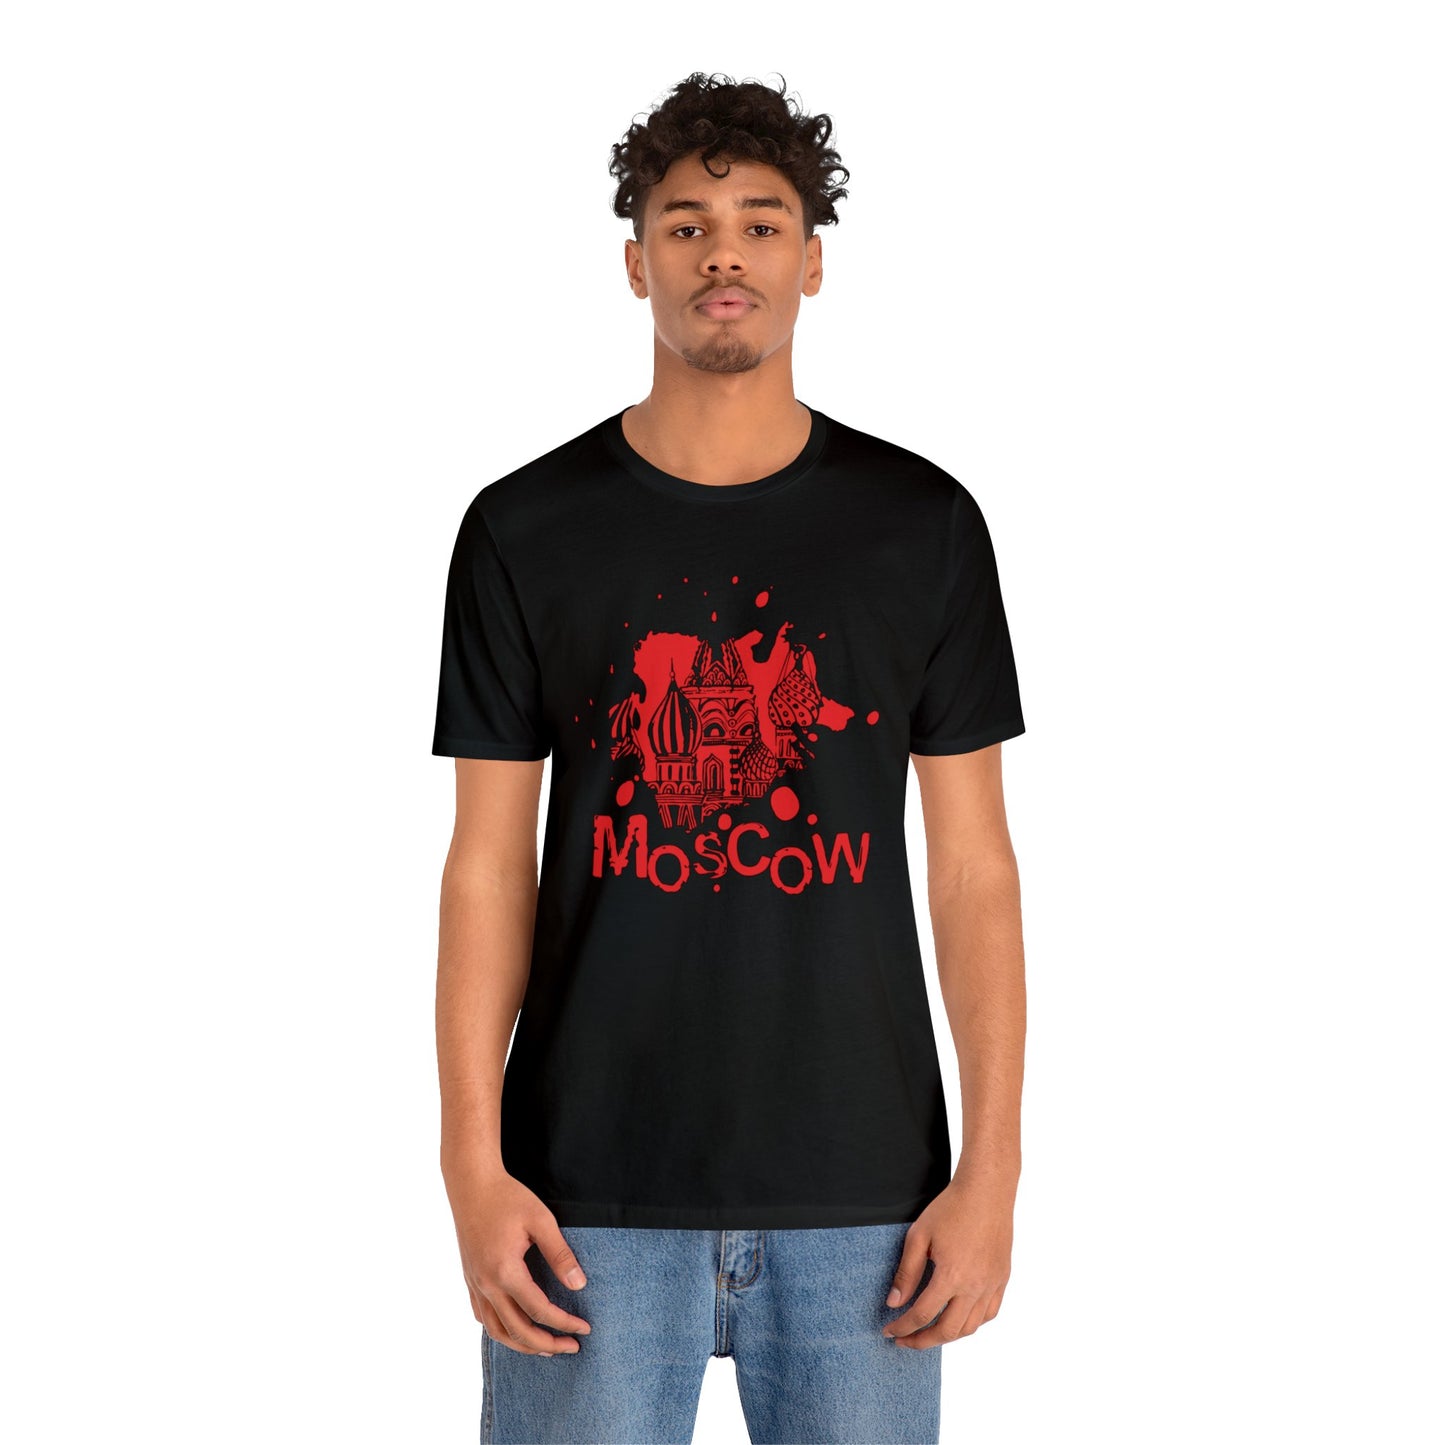 Moscow Red Square RU Culture T-Shirt